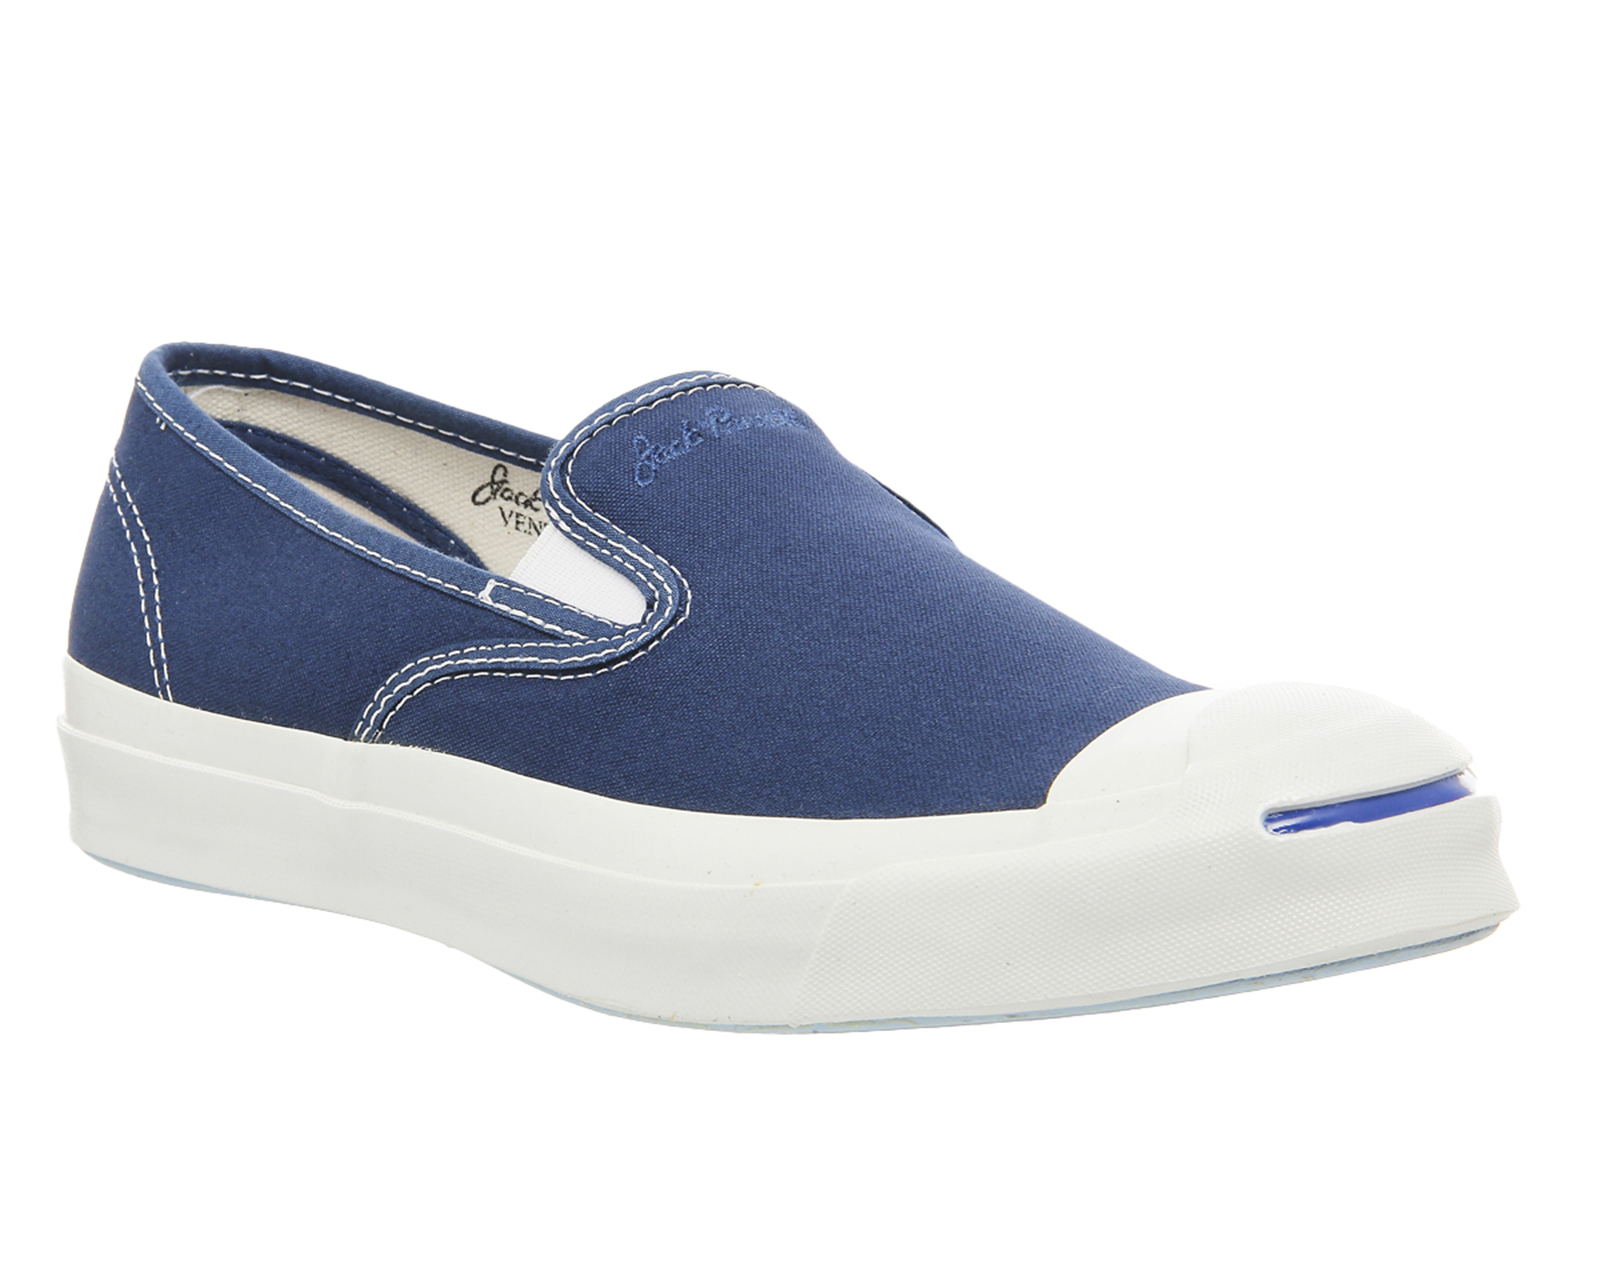 Converse Jack PurcellJack Purcell Signature Slip OnMidnight Hour Navy